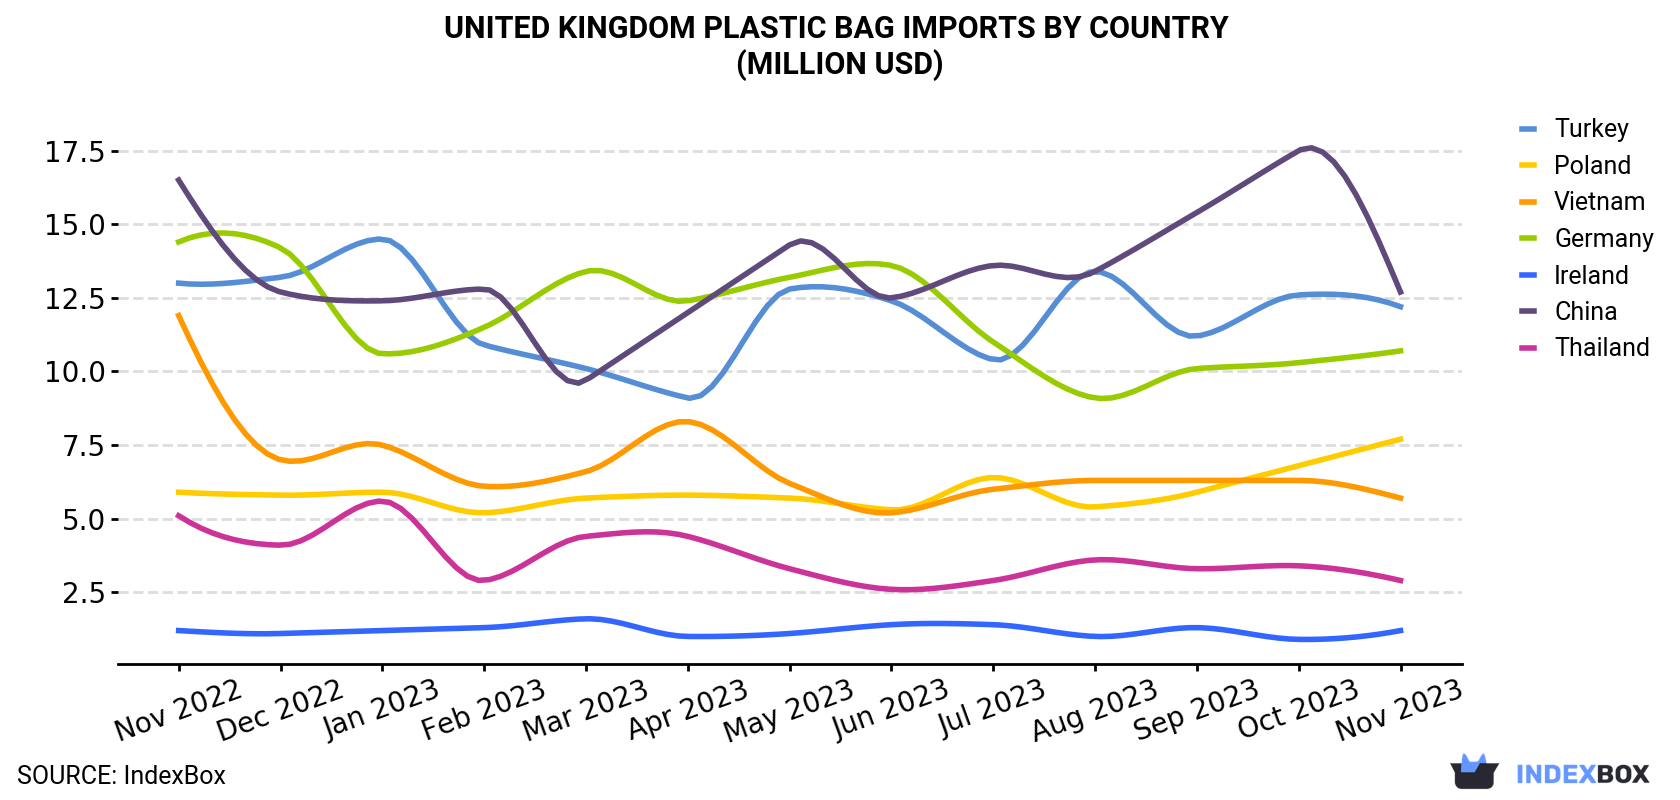 United Kingdom Plastic Bag Imports By Country (Million USD)